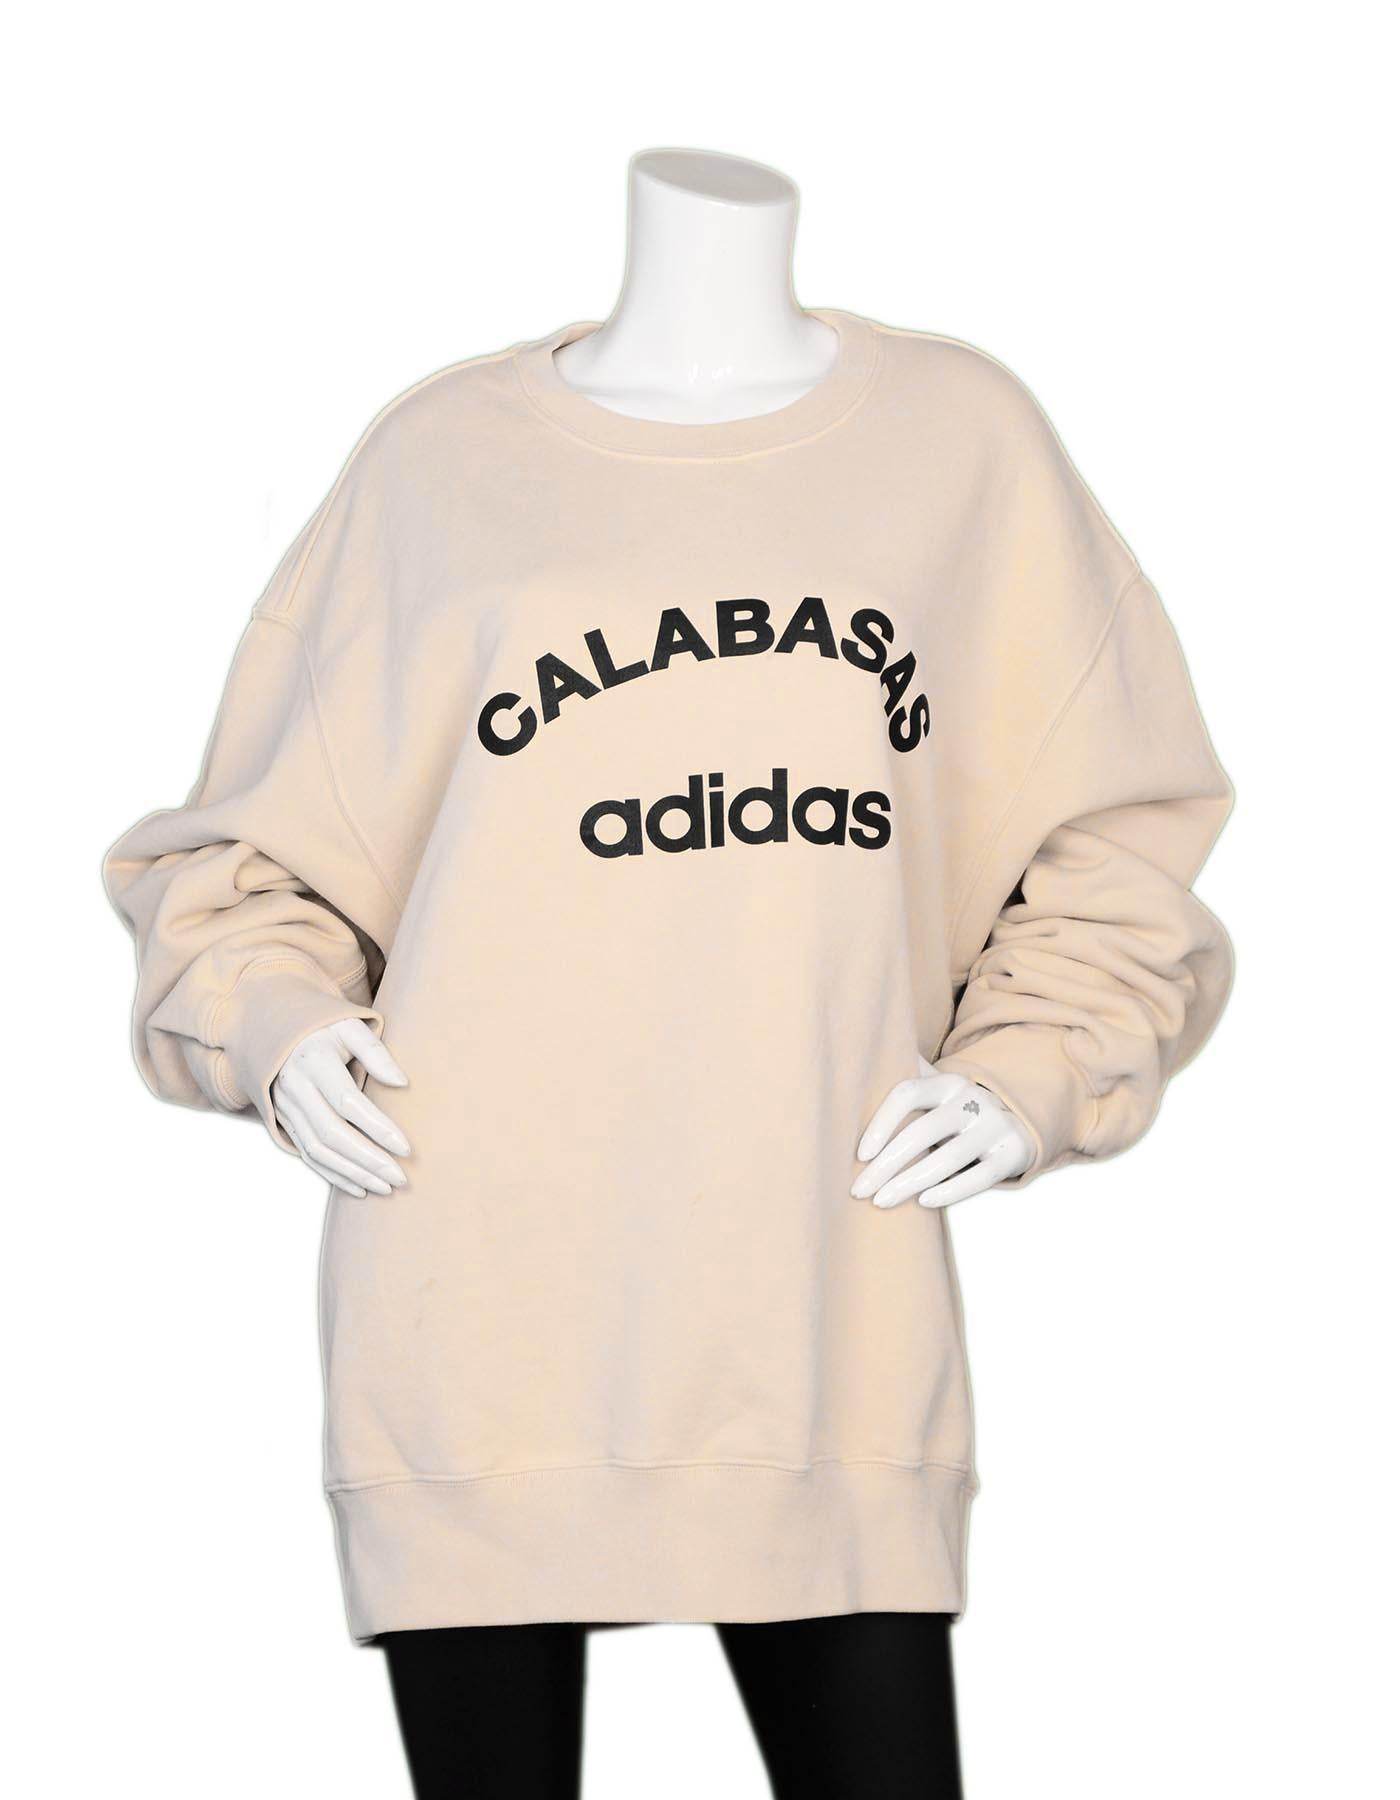 Yeezy Season 5 Beige Calabasas Adidas Crewneck Sweatshirt Men's XL

Color: Beige, black
Materials: 100% cotton
Rib:  95% cotton, 5% elastane
Opening/Closure: Pull over
Overall Condition: Very good pre-owned condition with exception of some light